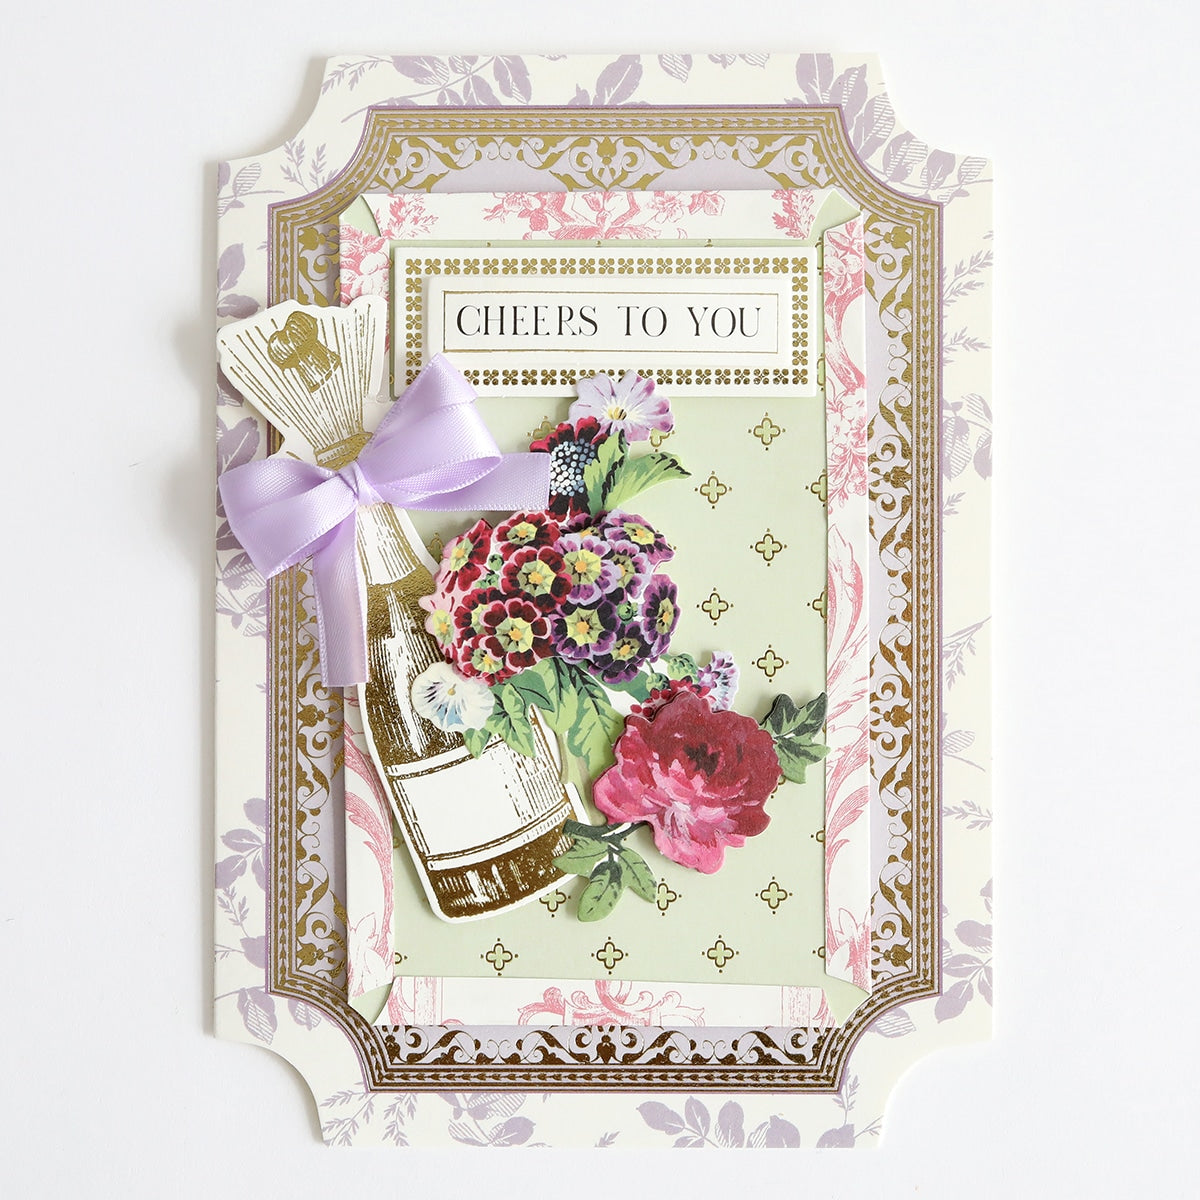 a card with a bottle of wine and flowers on it.